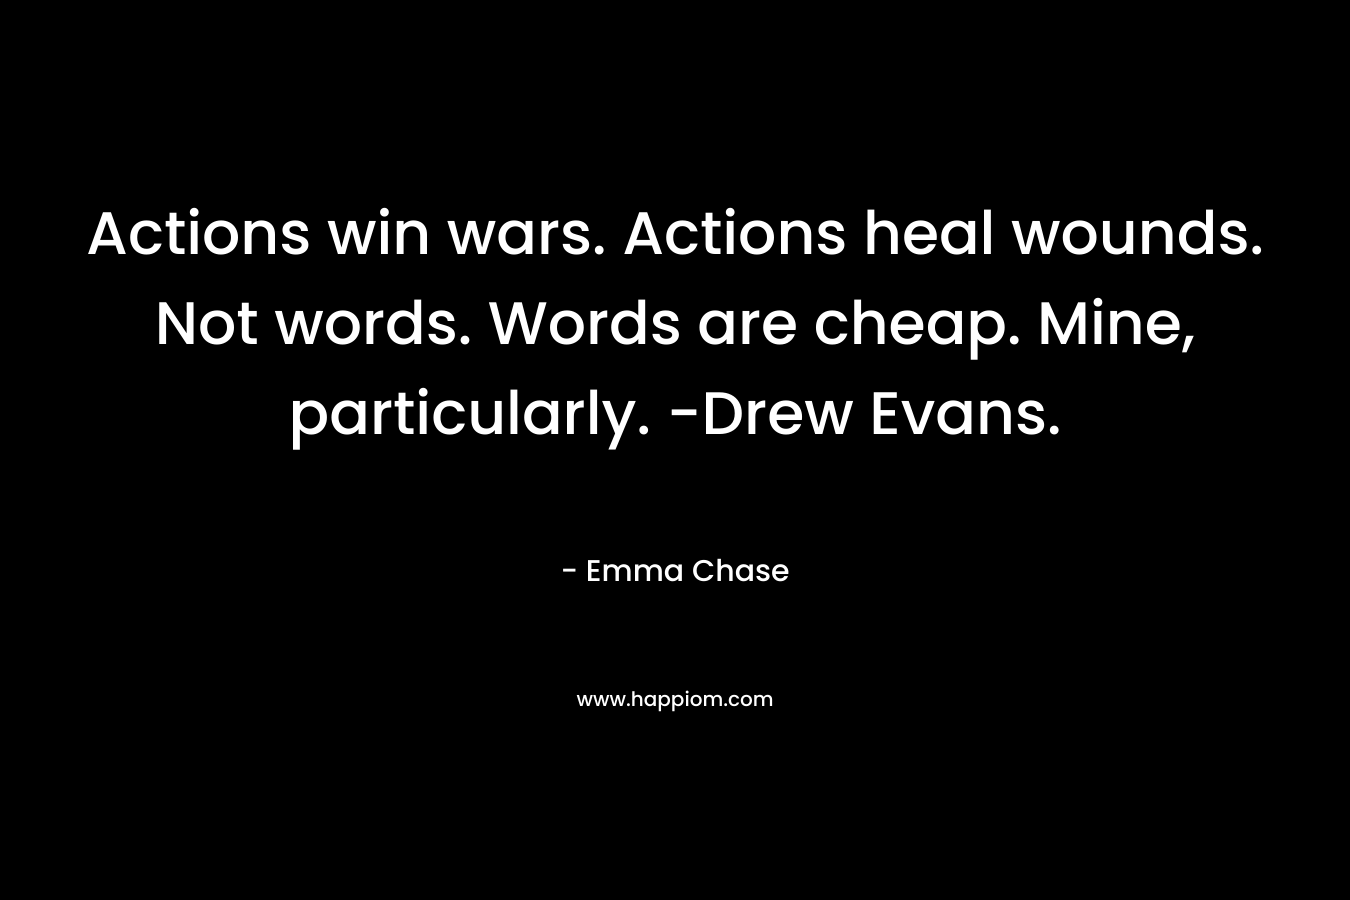 Actions win wars. Actions heal wounds. Not words. Words are cheap. Mine, particularly. -Drew Evans.